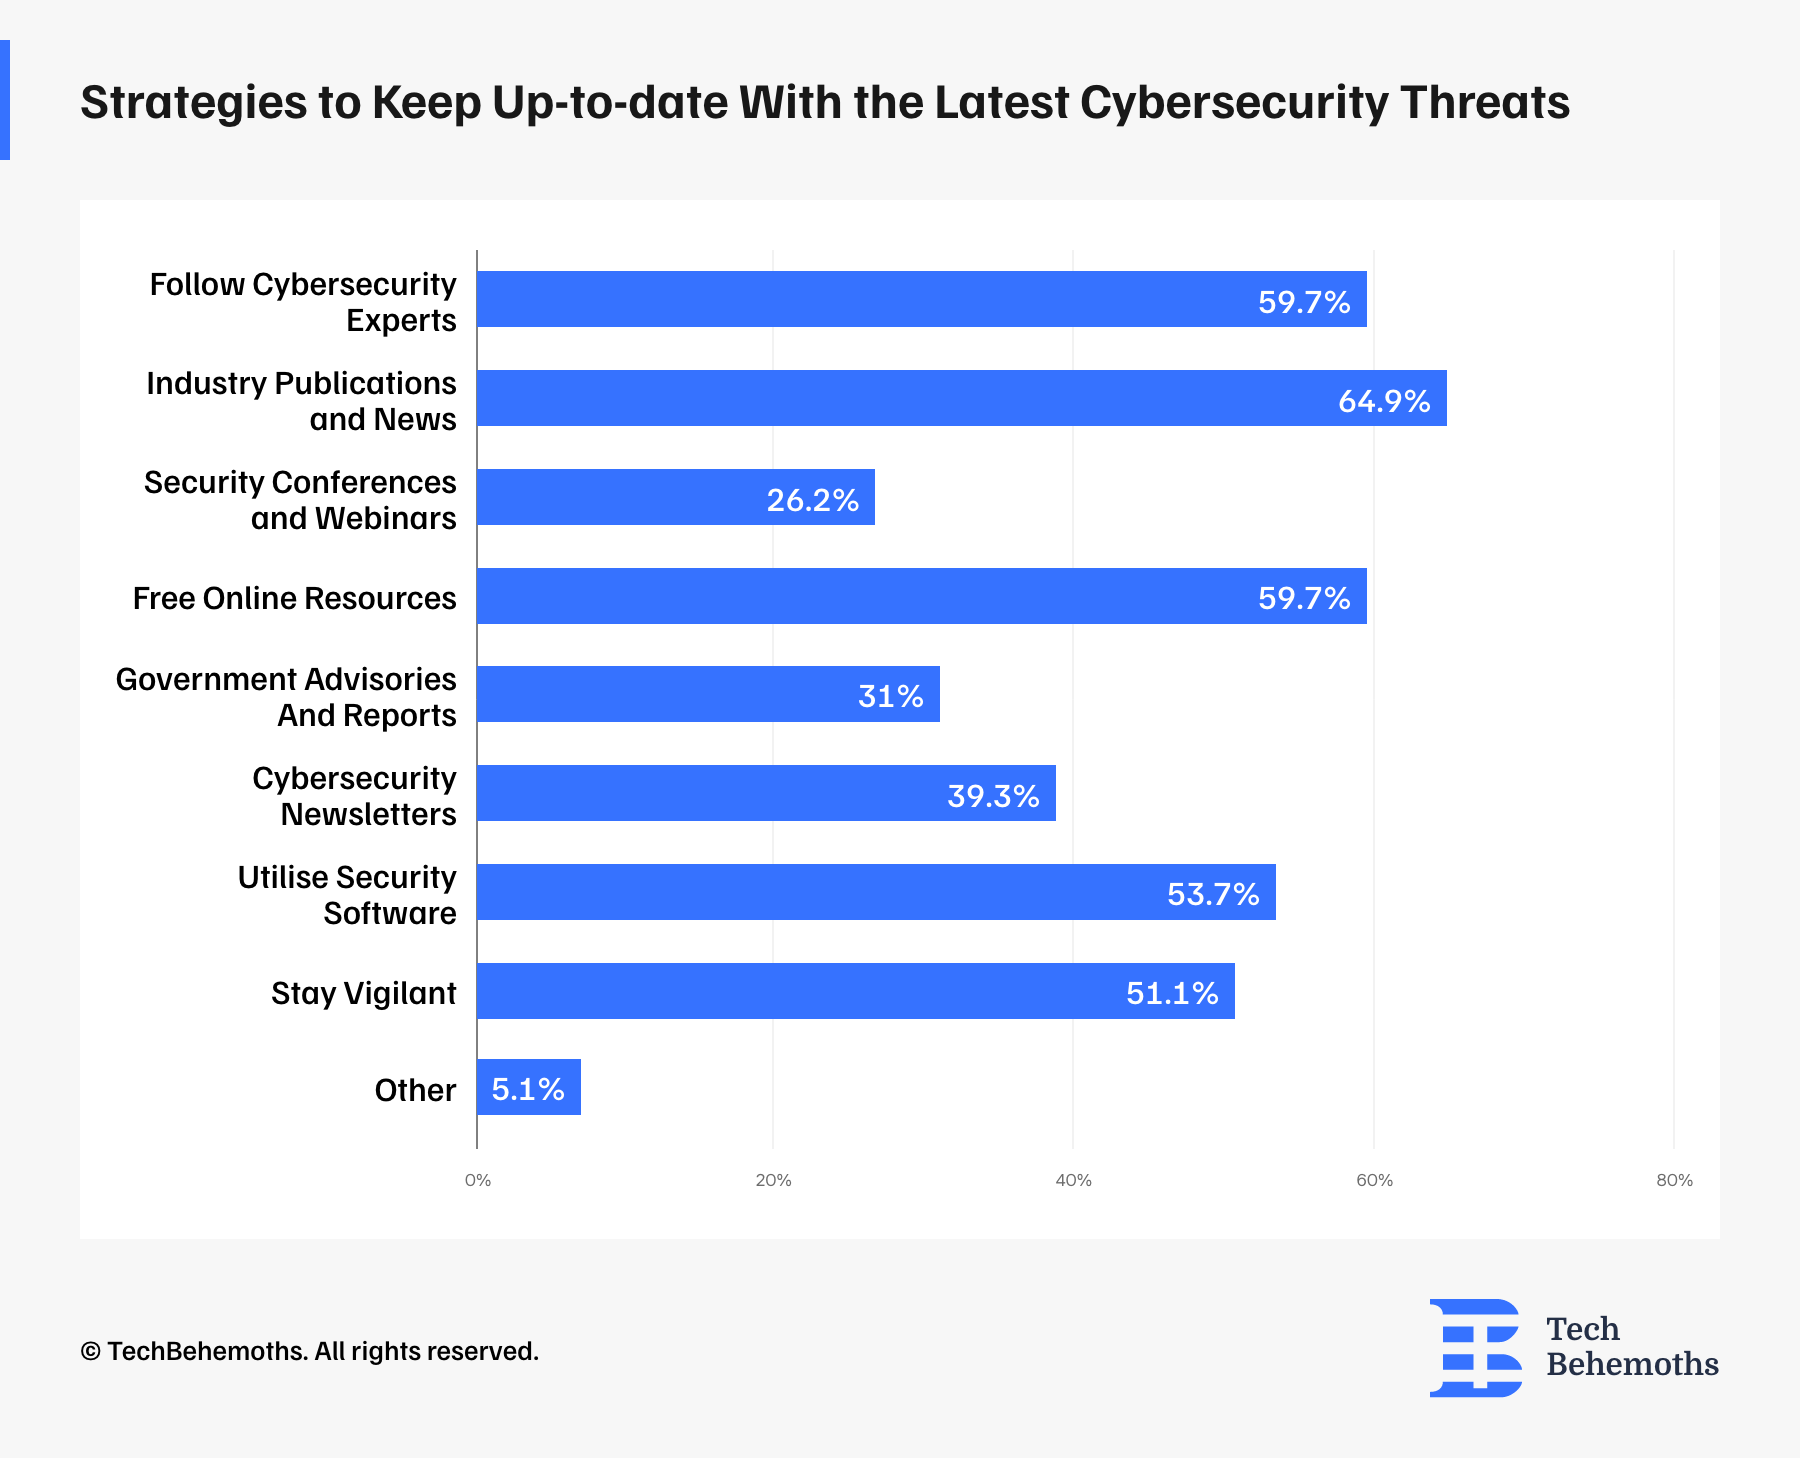 Strategies to keep up to date with lates cybersecurity threats